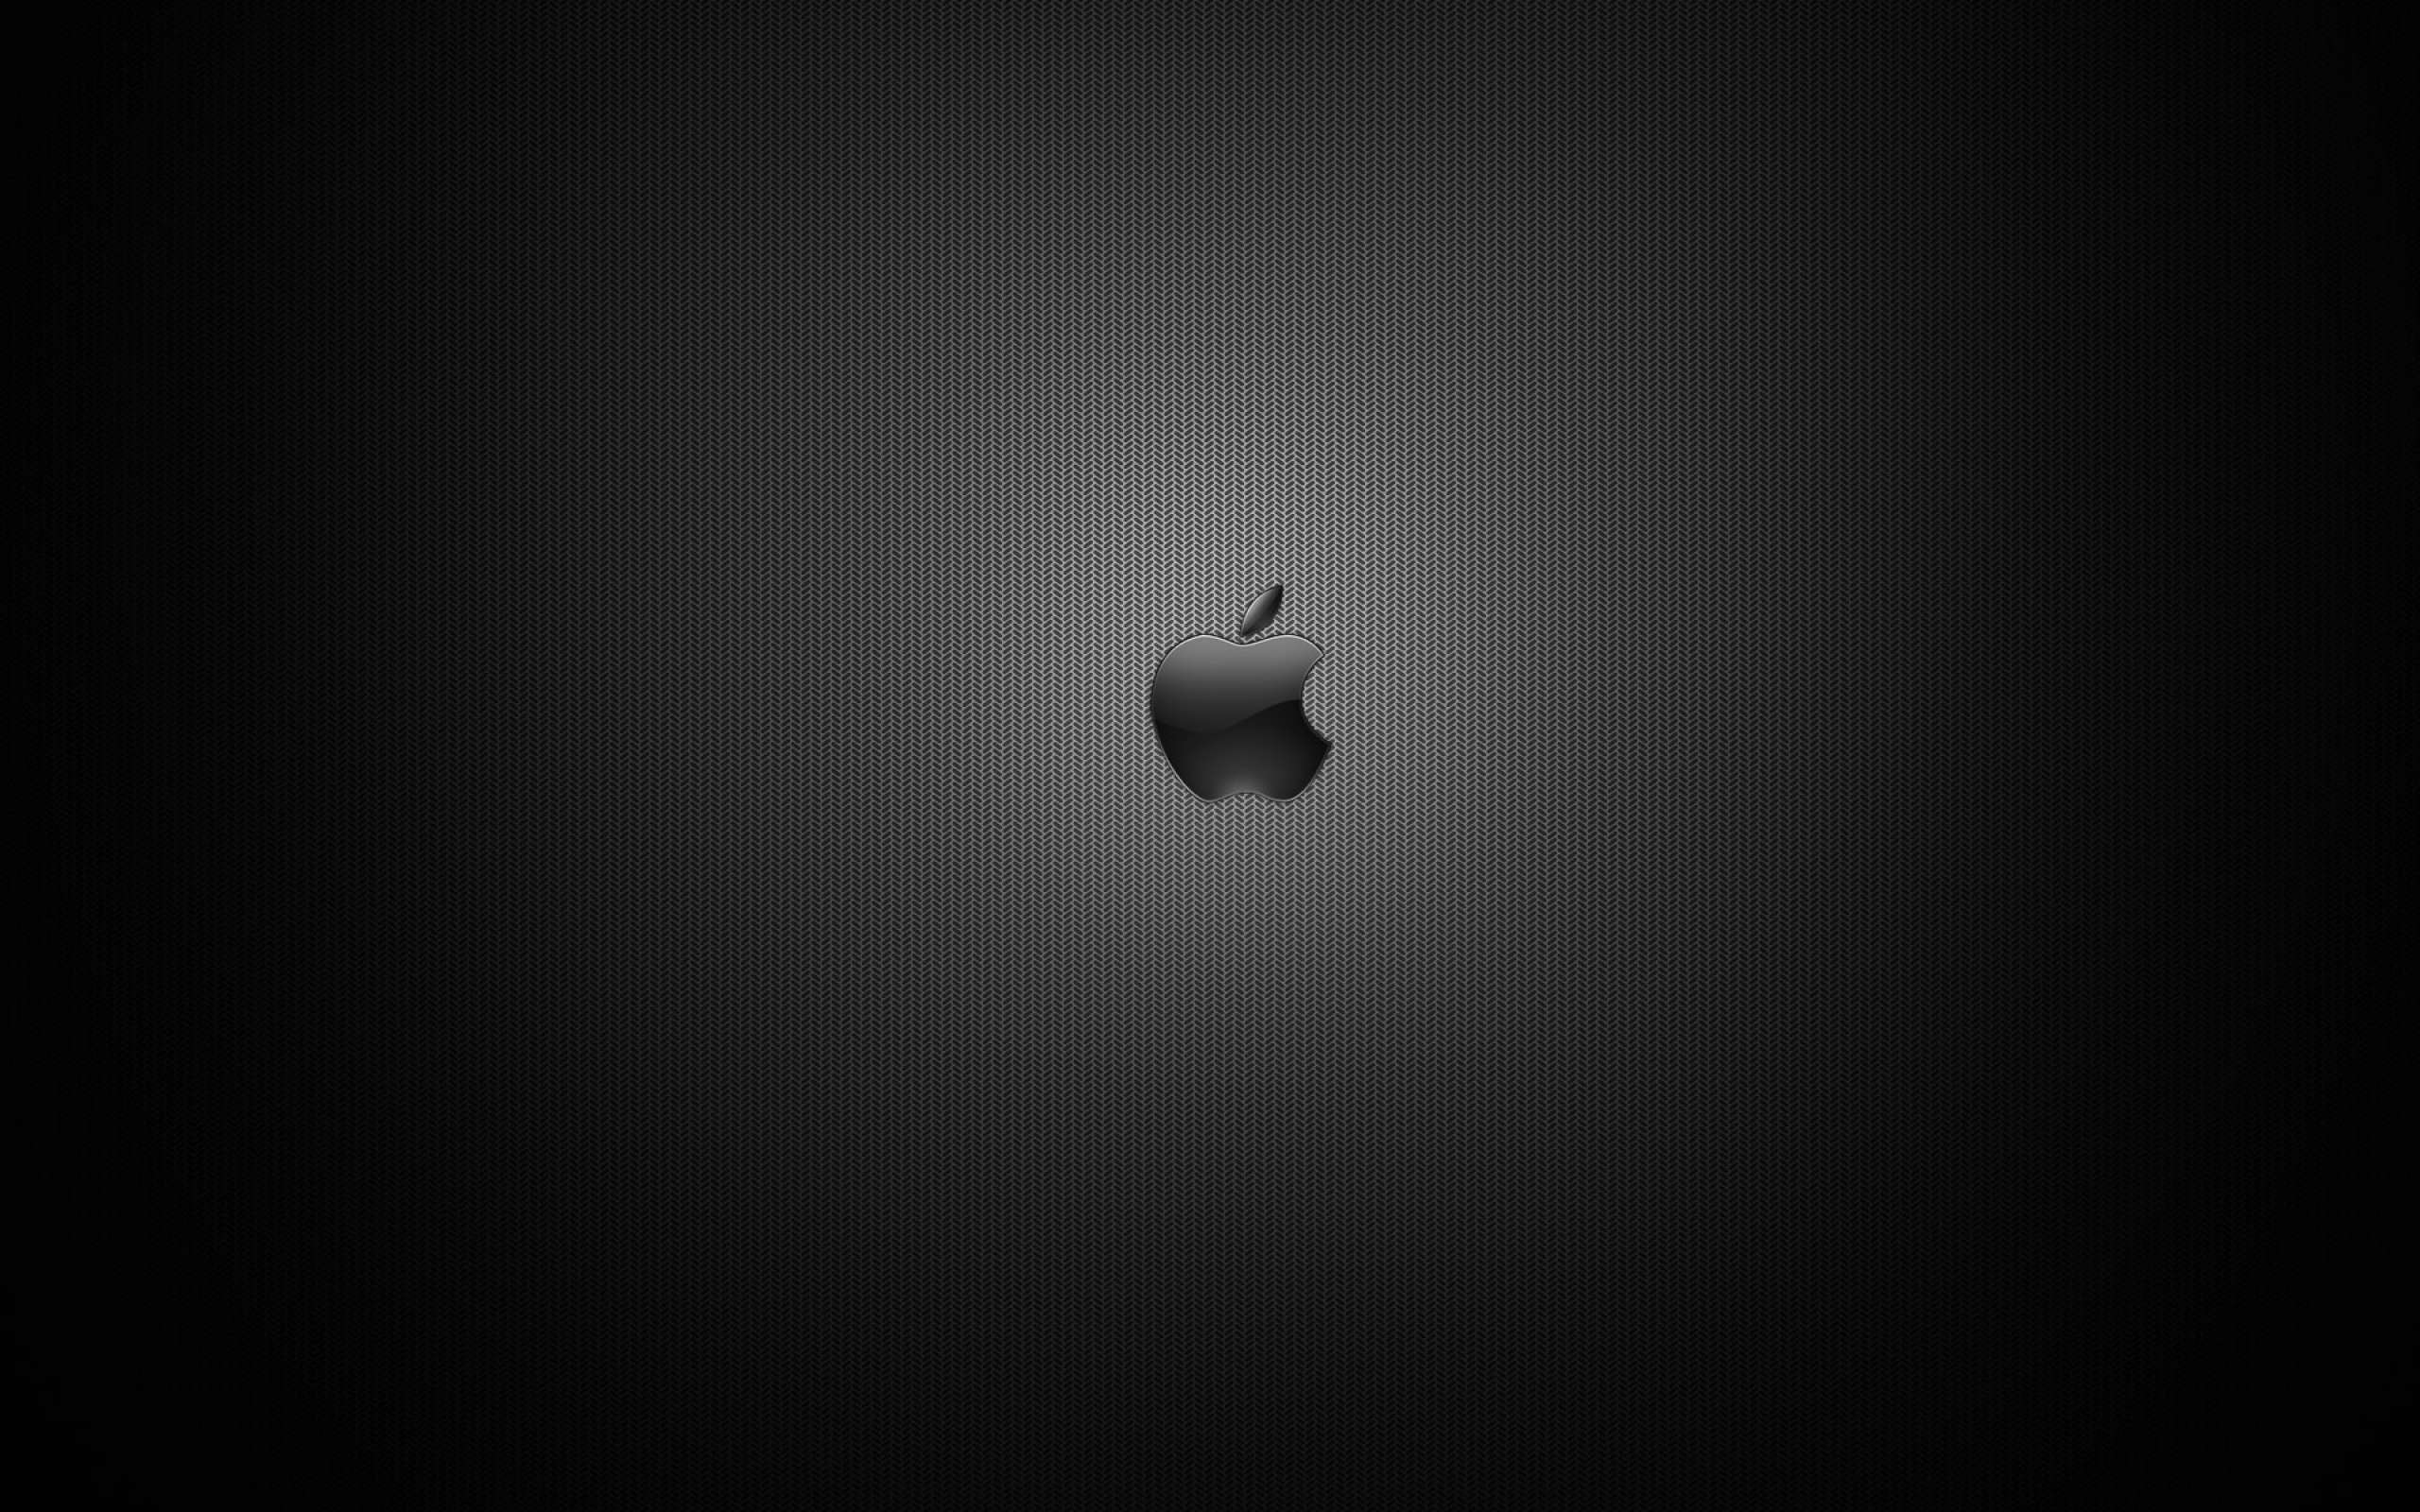 Red and Black Apple Logo - Apple Logo HD Wallpapers - Wallpaper Cave